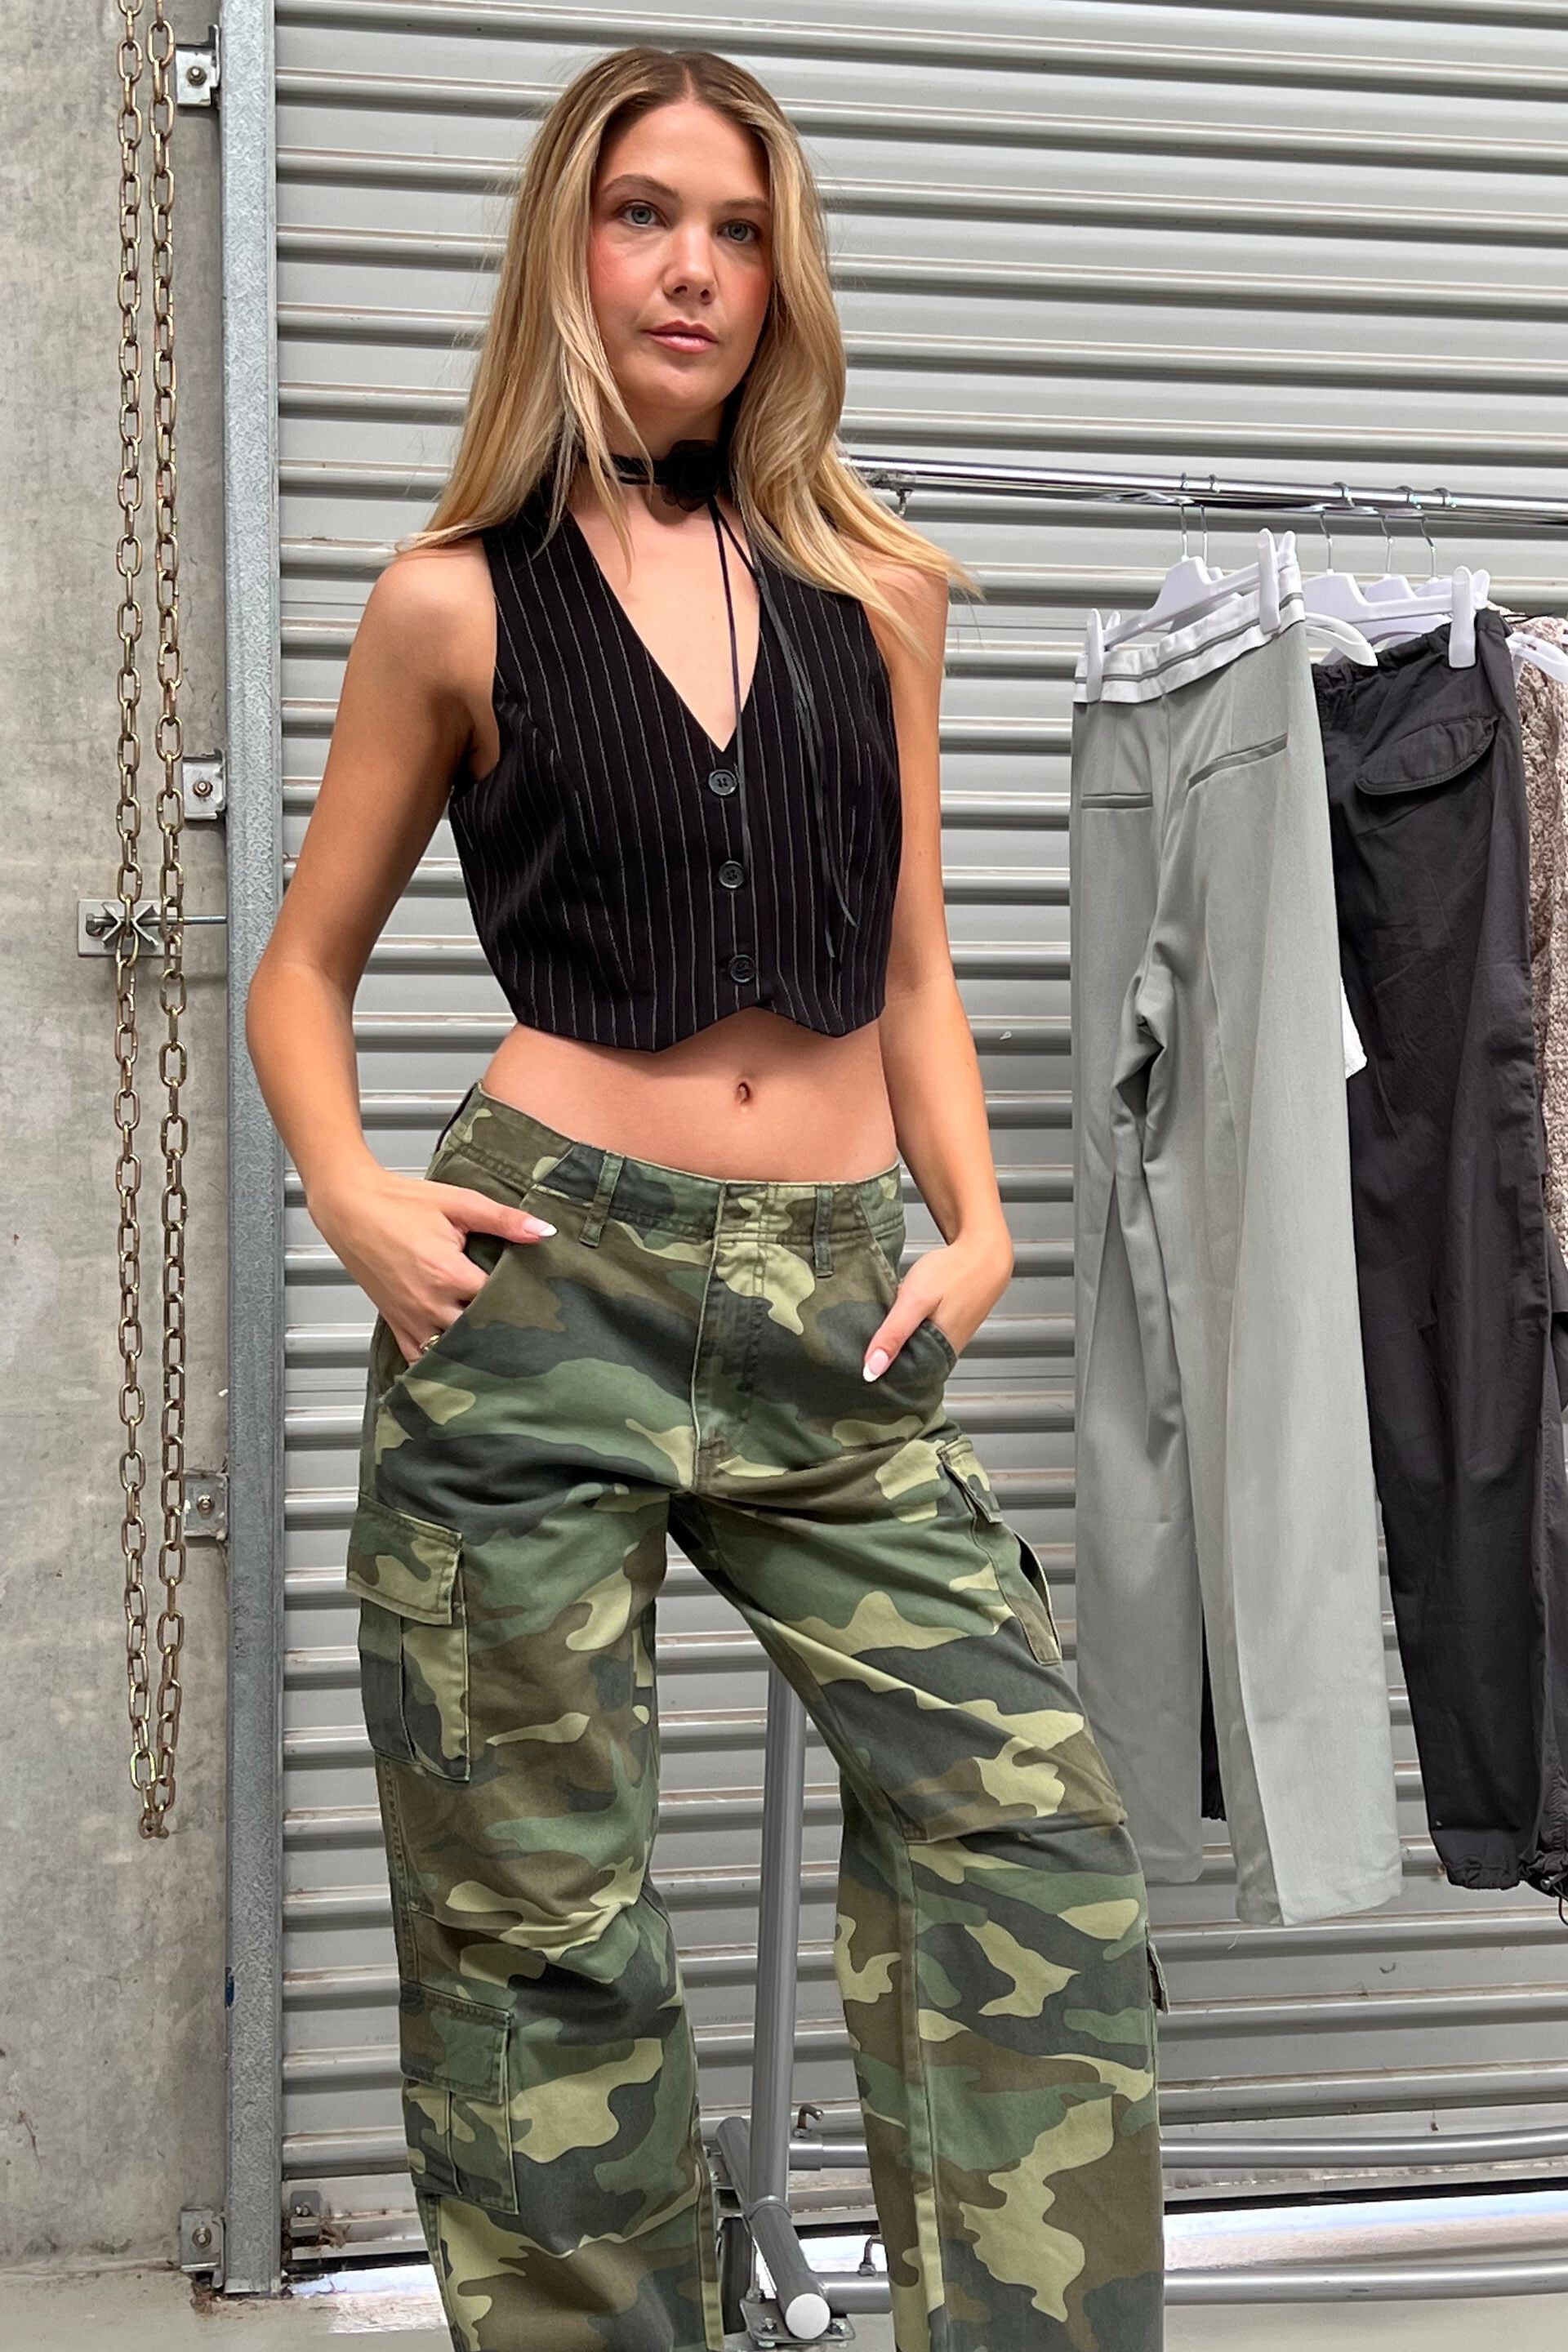 Women's Casual Military Camouflage Cargo Jeans Pants More Pocket Workout  Loose Straight Cotton Army Green Trousers Female